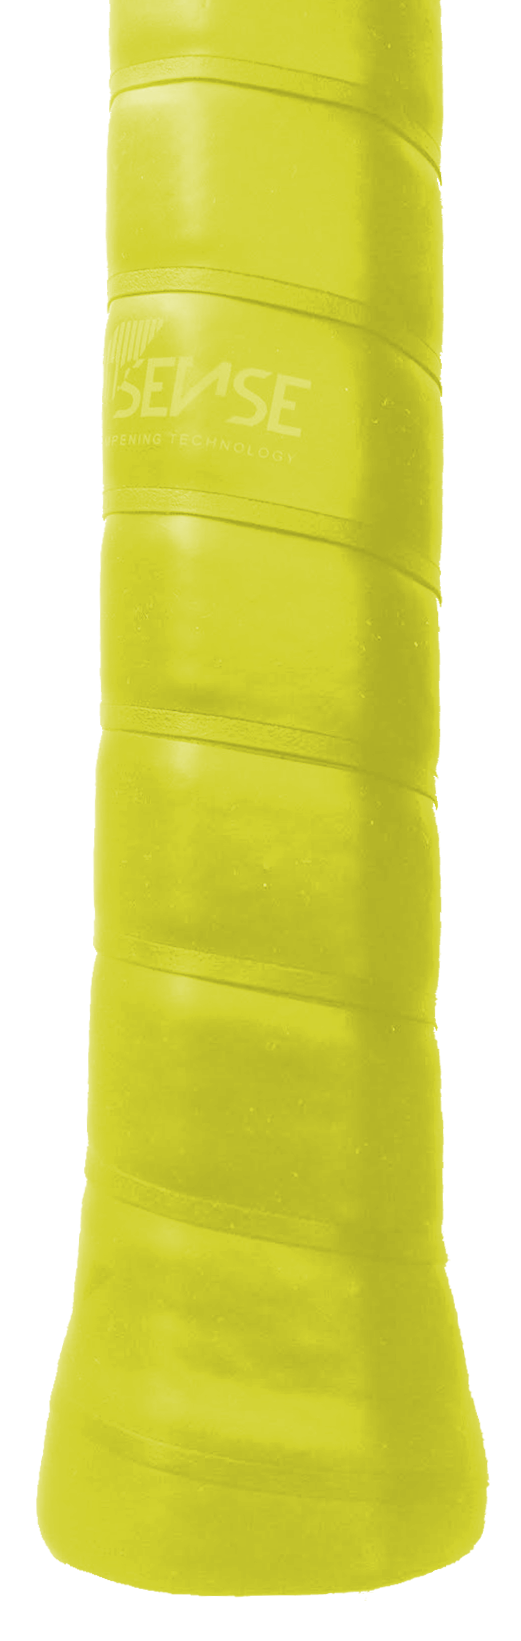 New Soft Compound - Pure Grips DTX Standard Grips - NEON Yellow x